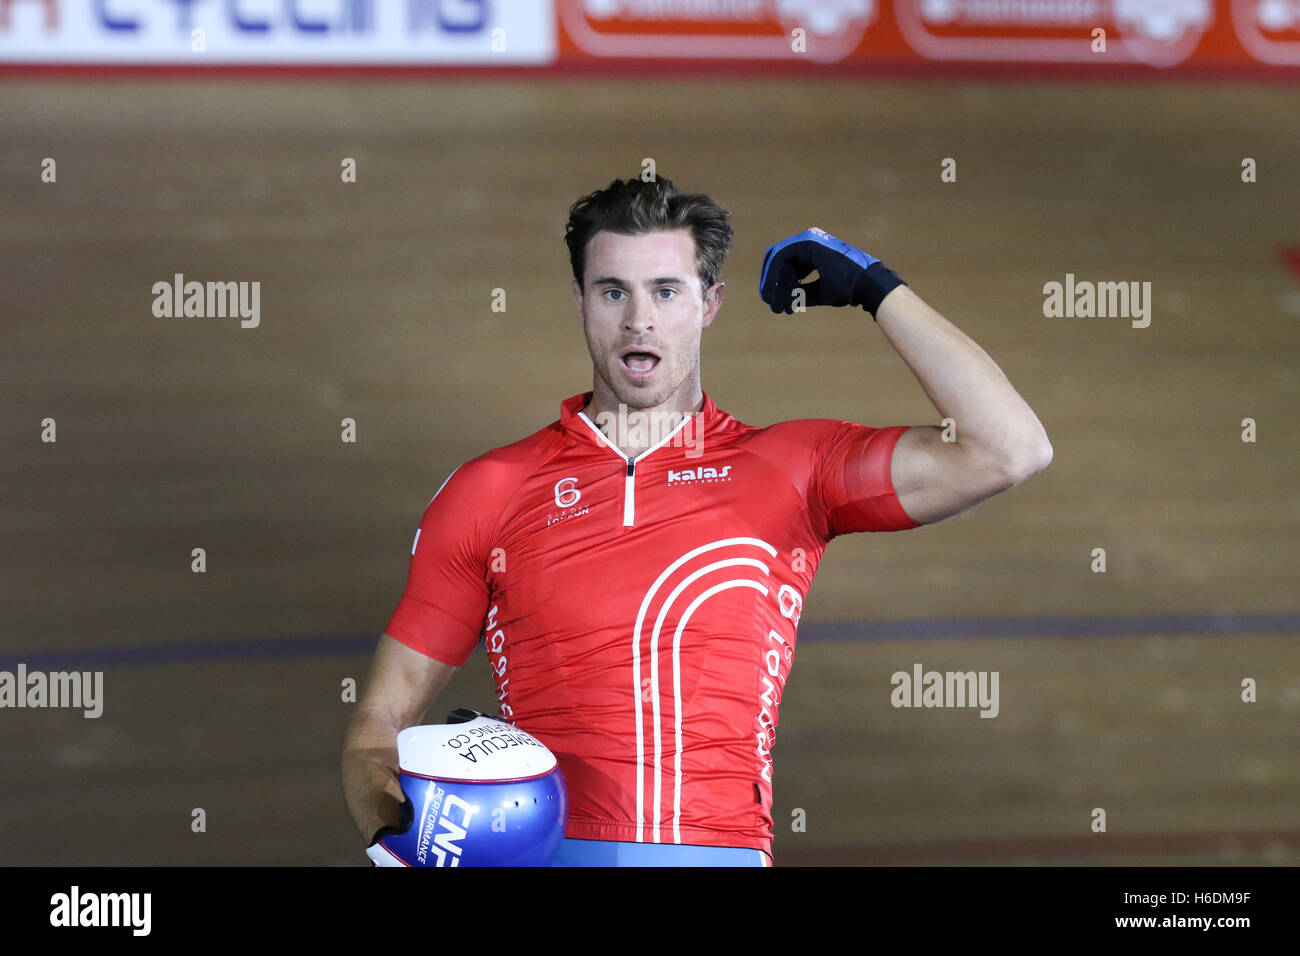 London, UK. 27th Oct, 2016. Sprinter Nate Koch. Cyclists compete in the third day of the London Six Day cycling event. Lee Valley Velodrome, Olympic Park, London, UK. Copyright Credit:  carol moir/Alamy Live News Stock Photo